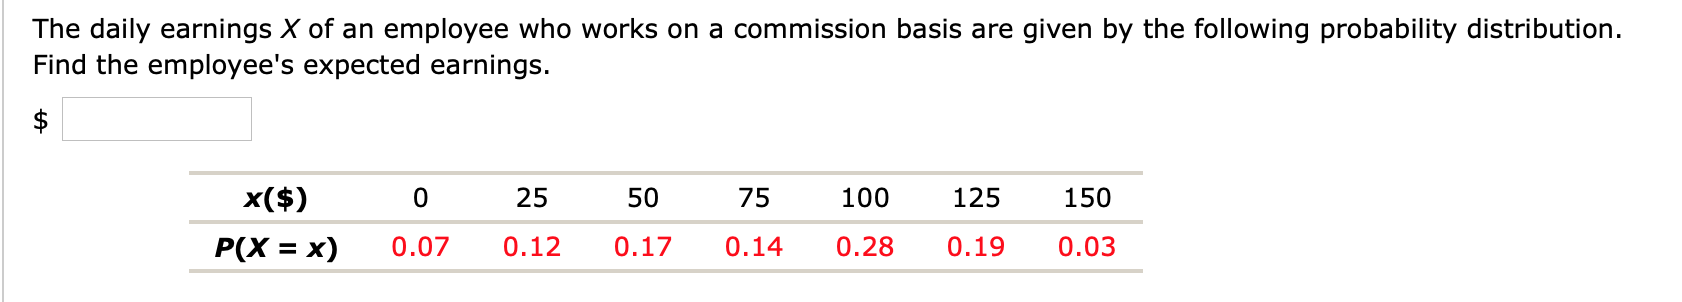 The daily earnings X of an employee who works on a commission basis are given by the following probability distribution.
Find the employee's expected earnings.
x($)
25
50
75
100
125
150
P(X = x)
0.07
0.12
0.17
0.14
0.28
0.19
0.03
